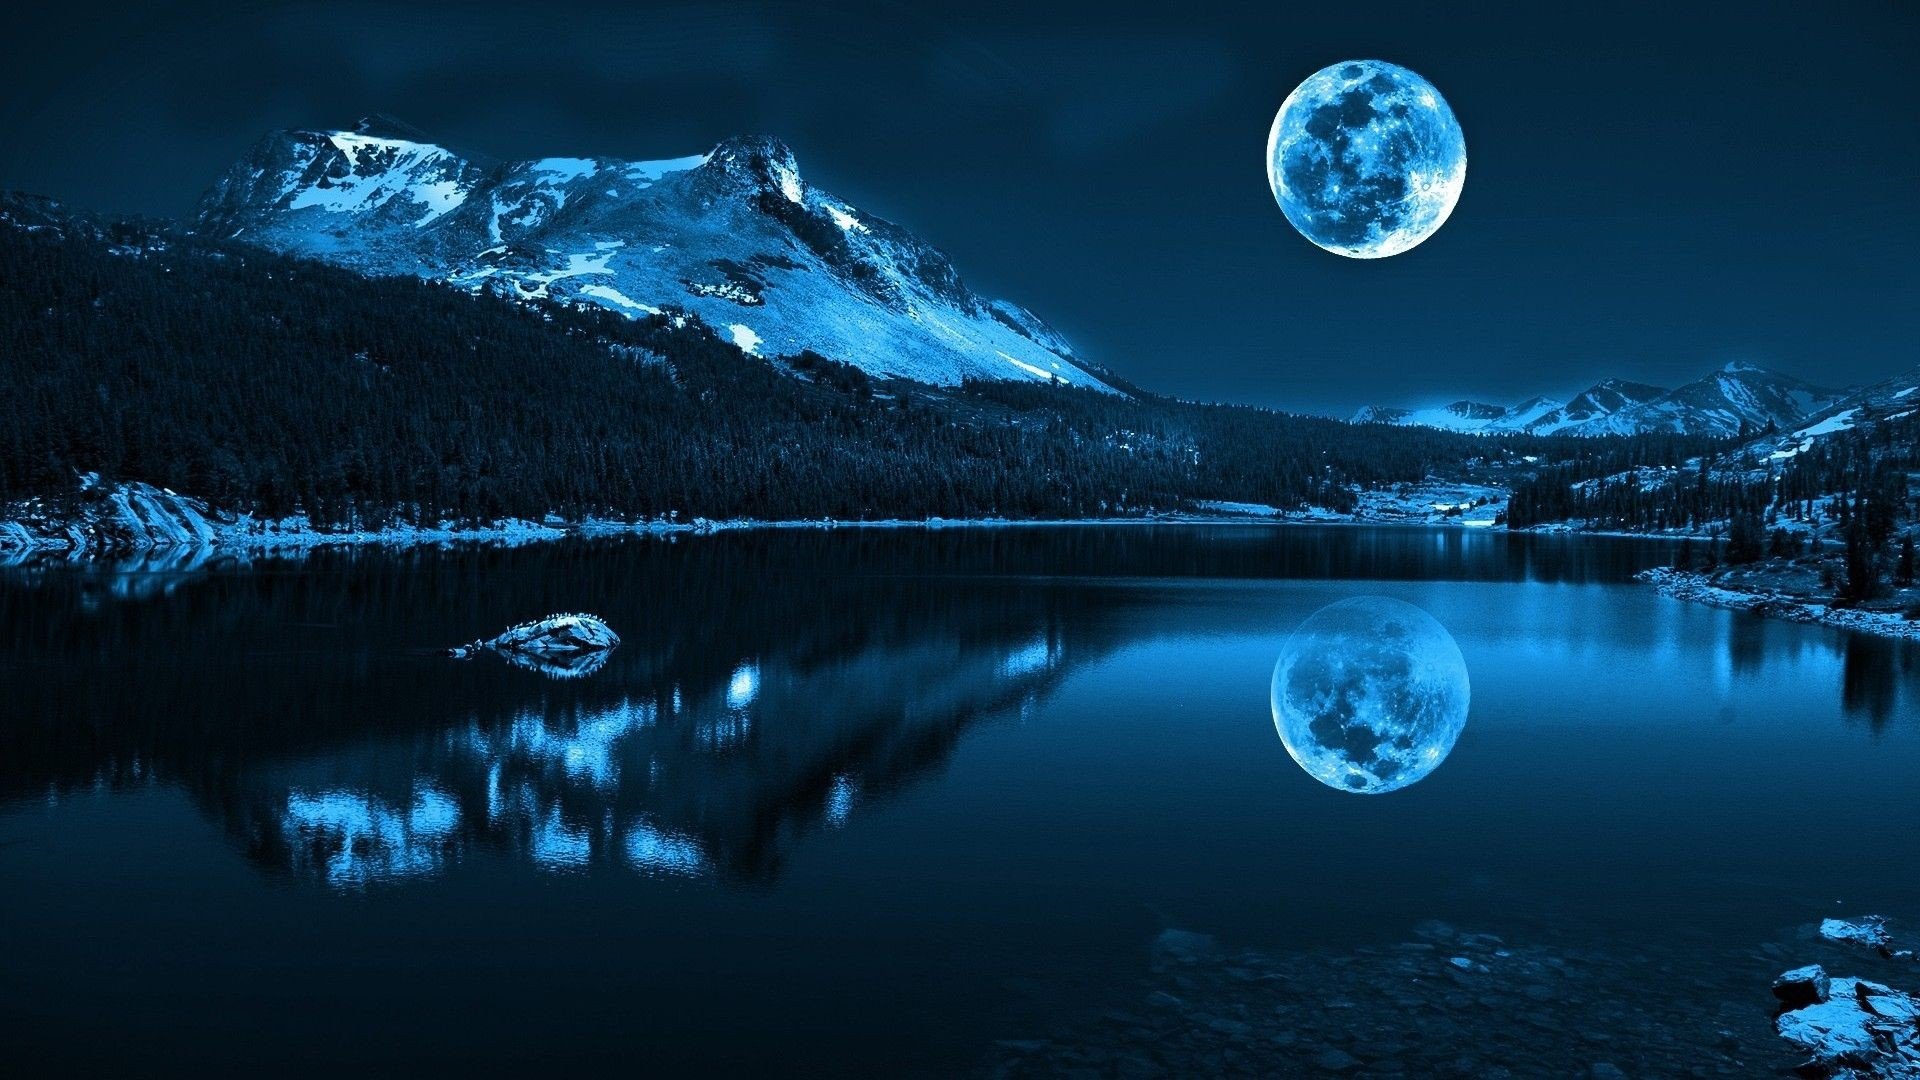 The big round moon is reflected in the lake